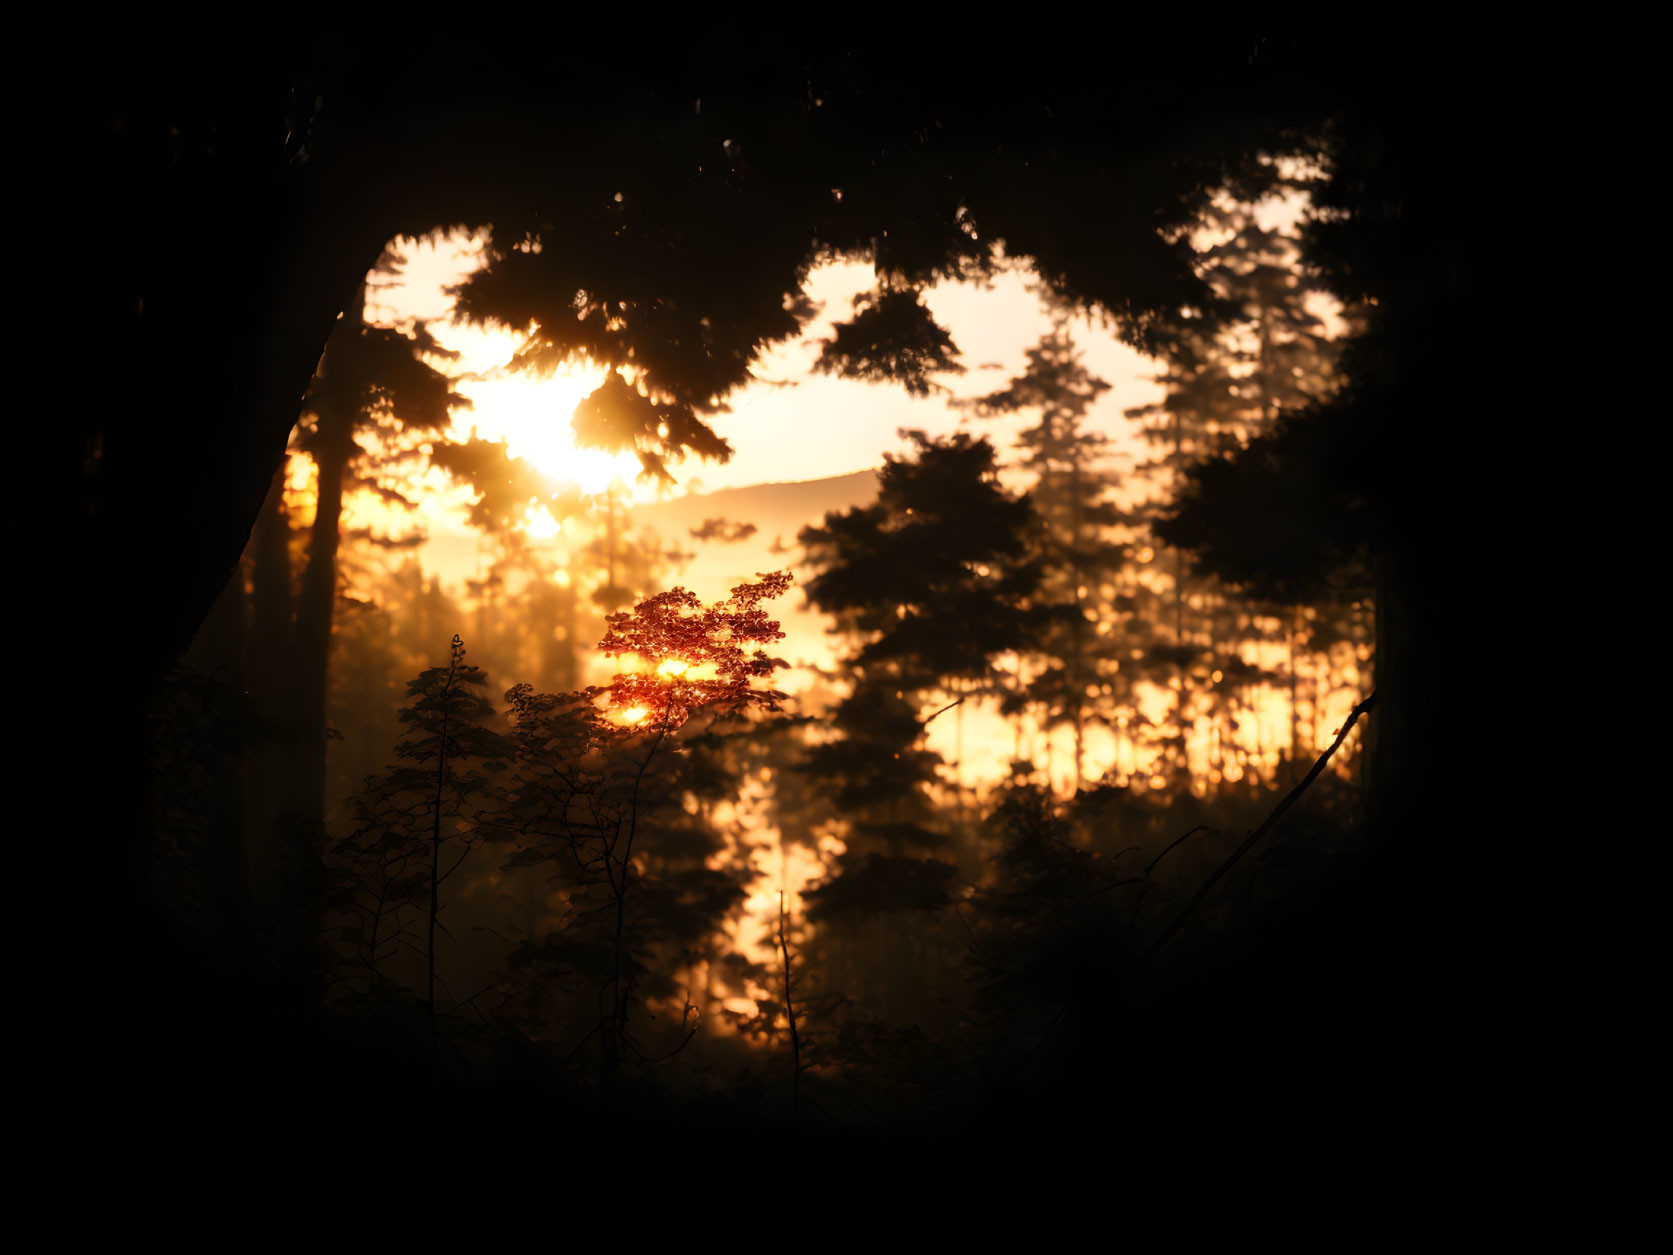 Forest sunset